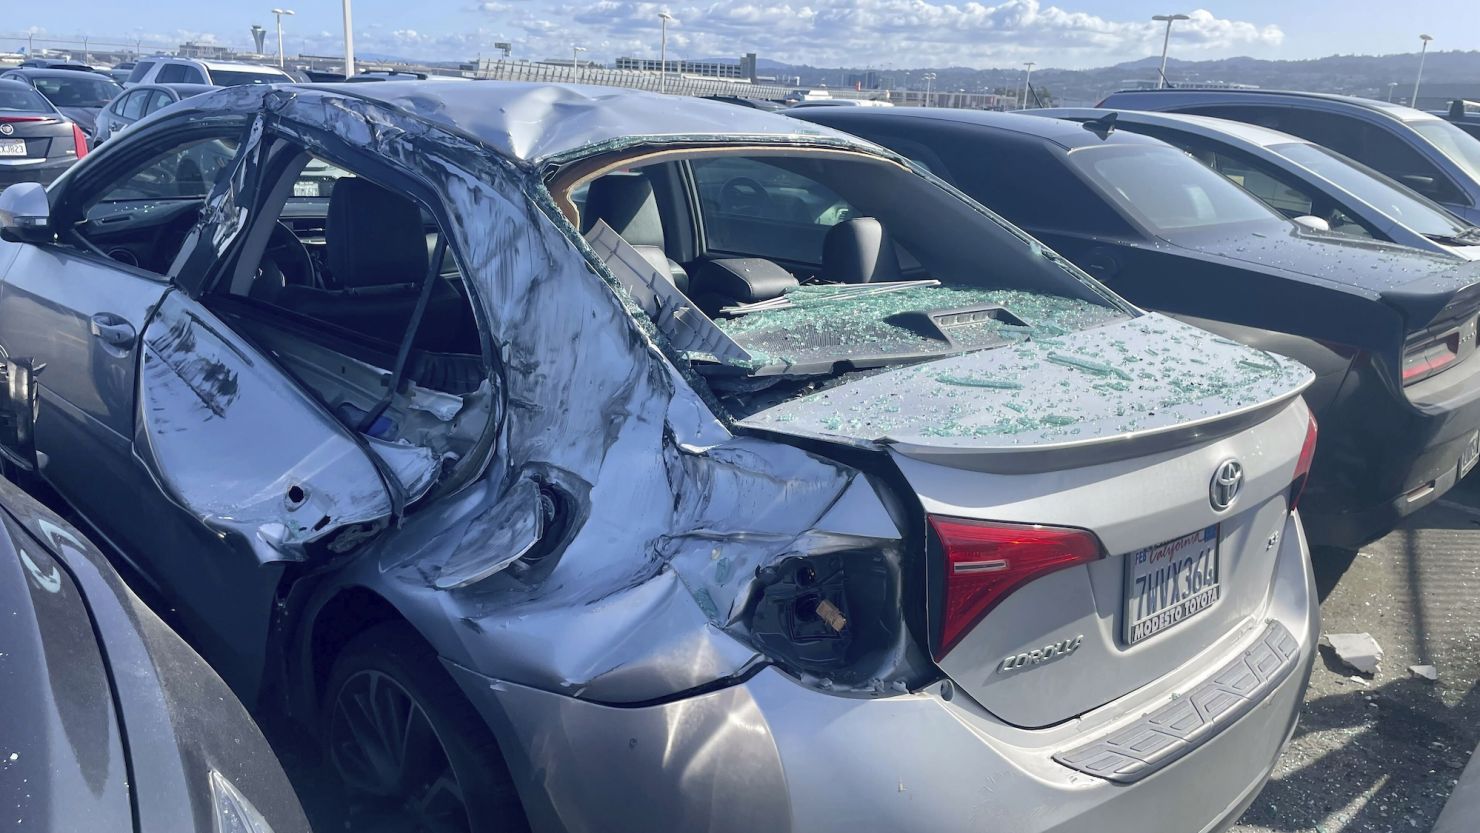 A damaged car is seen Thursday in an employee parking lot after tire debris from a United Airlines plane landed on it at San Francisco International Airport.